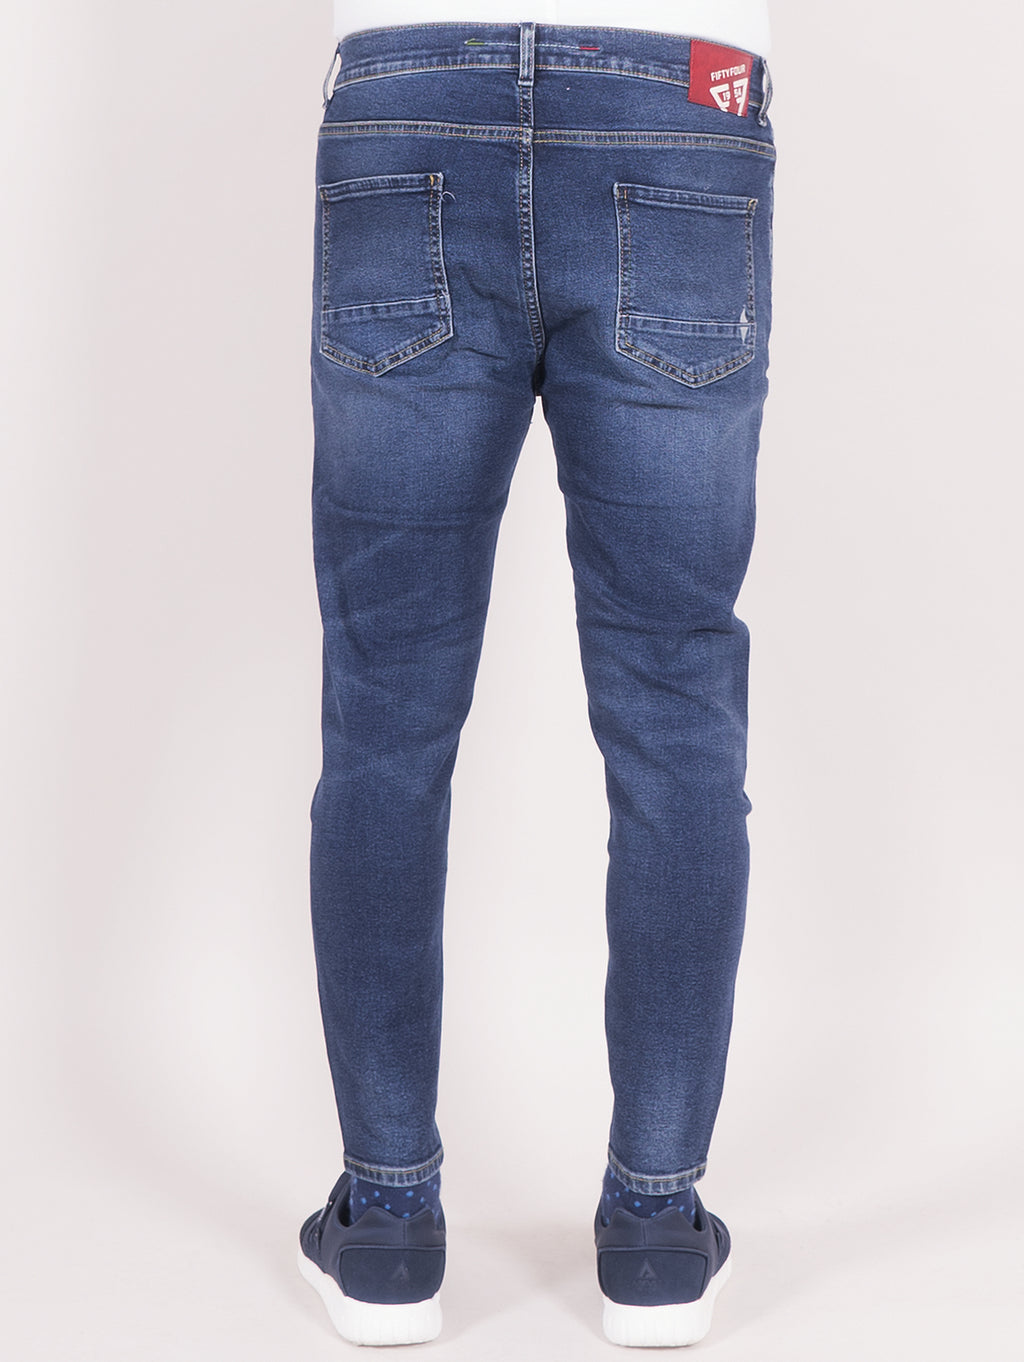 FIFTY FOUR JEANS SKINNY CARROT  -20%